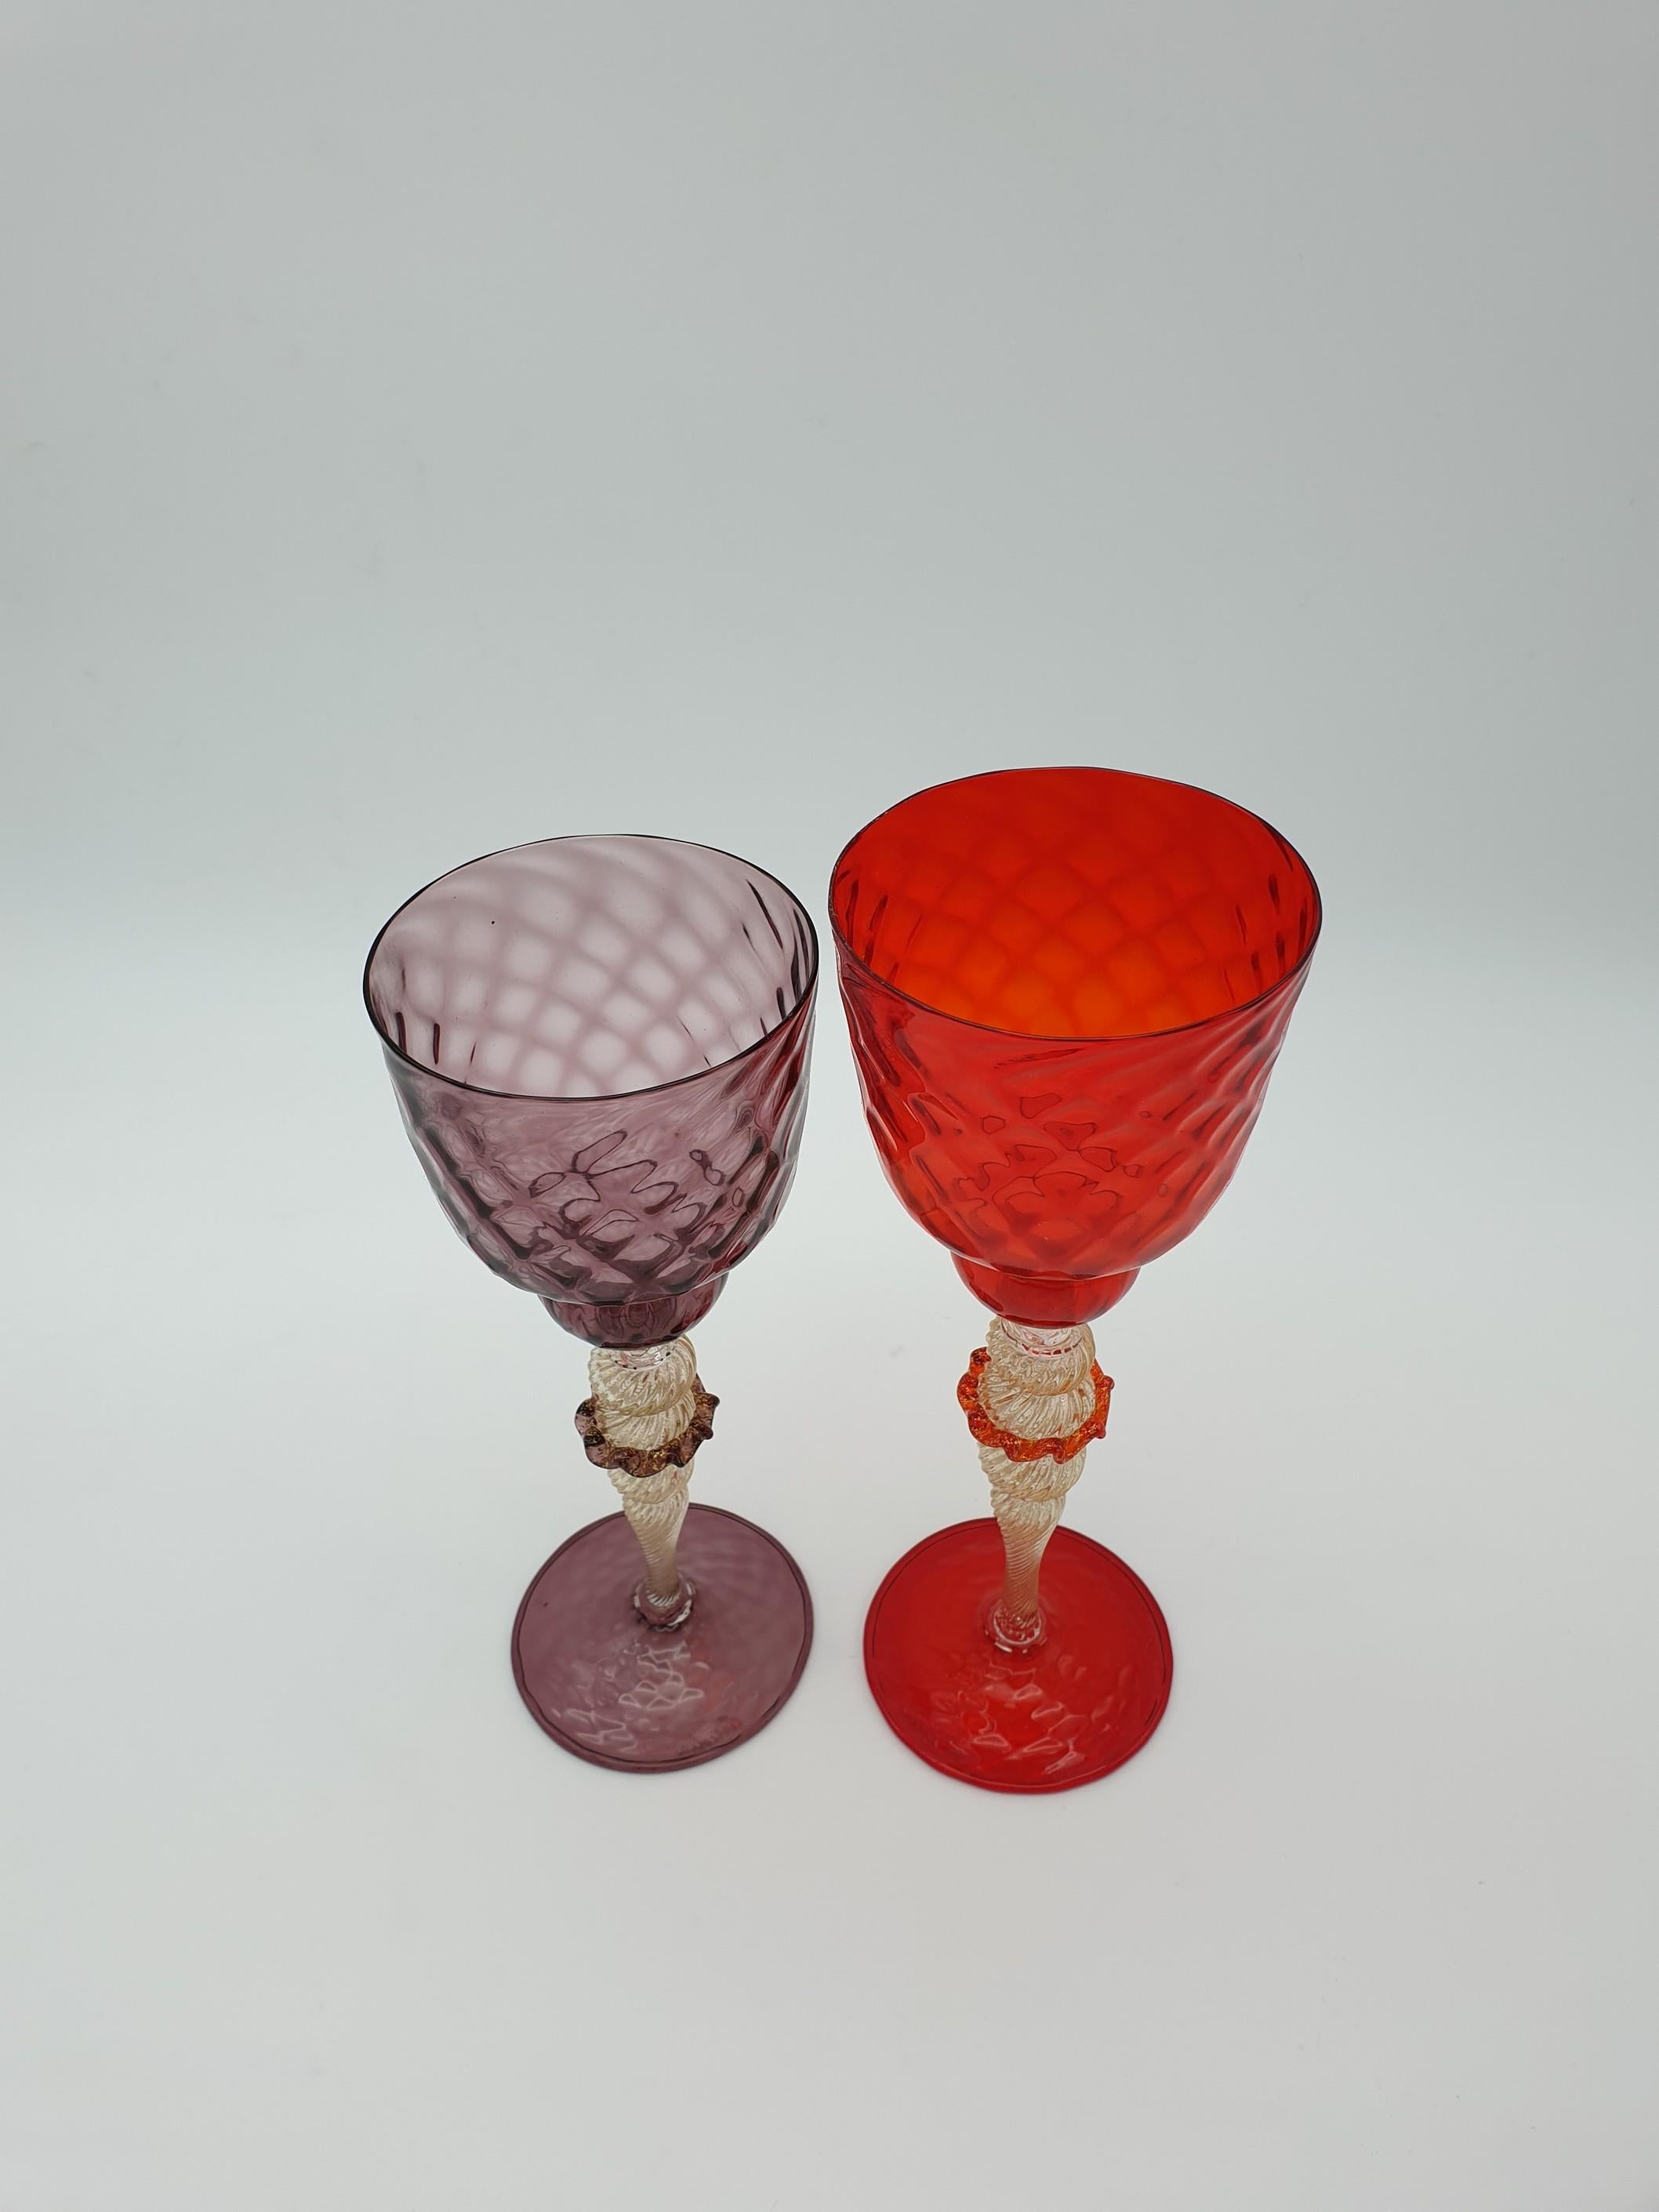 Pair of modern Murano glass goblets, completely handmade and mouth-blown by Gino Cenedese e Figlio glass factory in the late 1990s. This striking set is made of two similar goblets, one in amethyst and the other in red color. Both goblets feature a